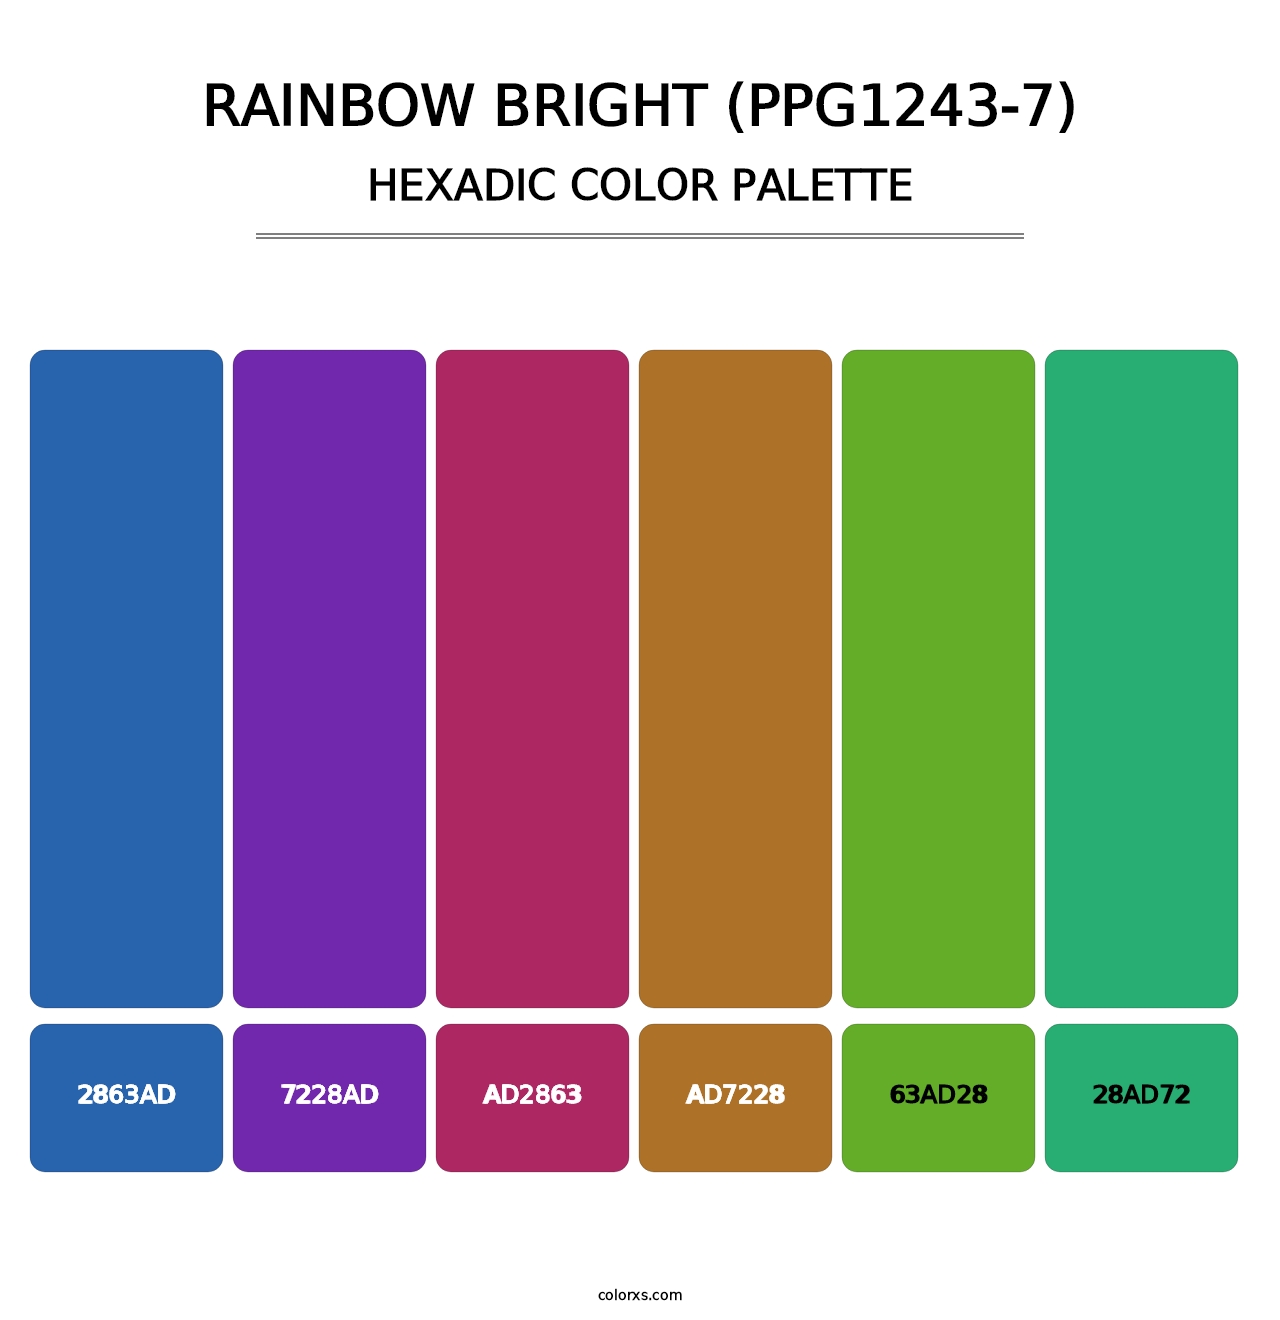 Rainbow Bright (PPG1243-7) - Hexadic Color Palette